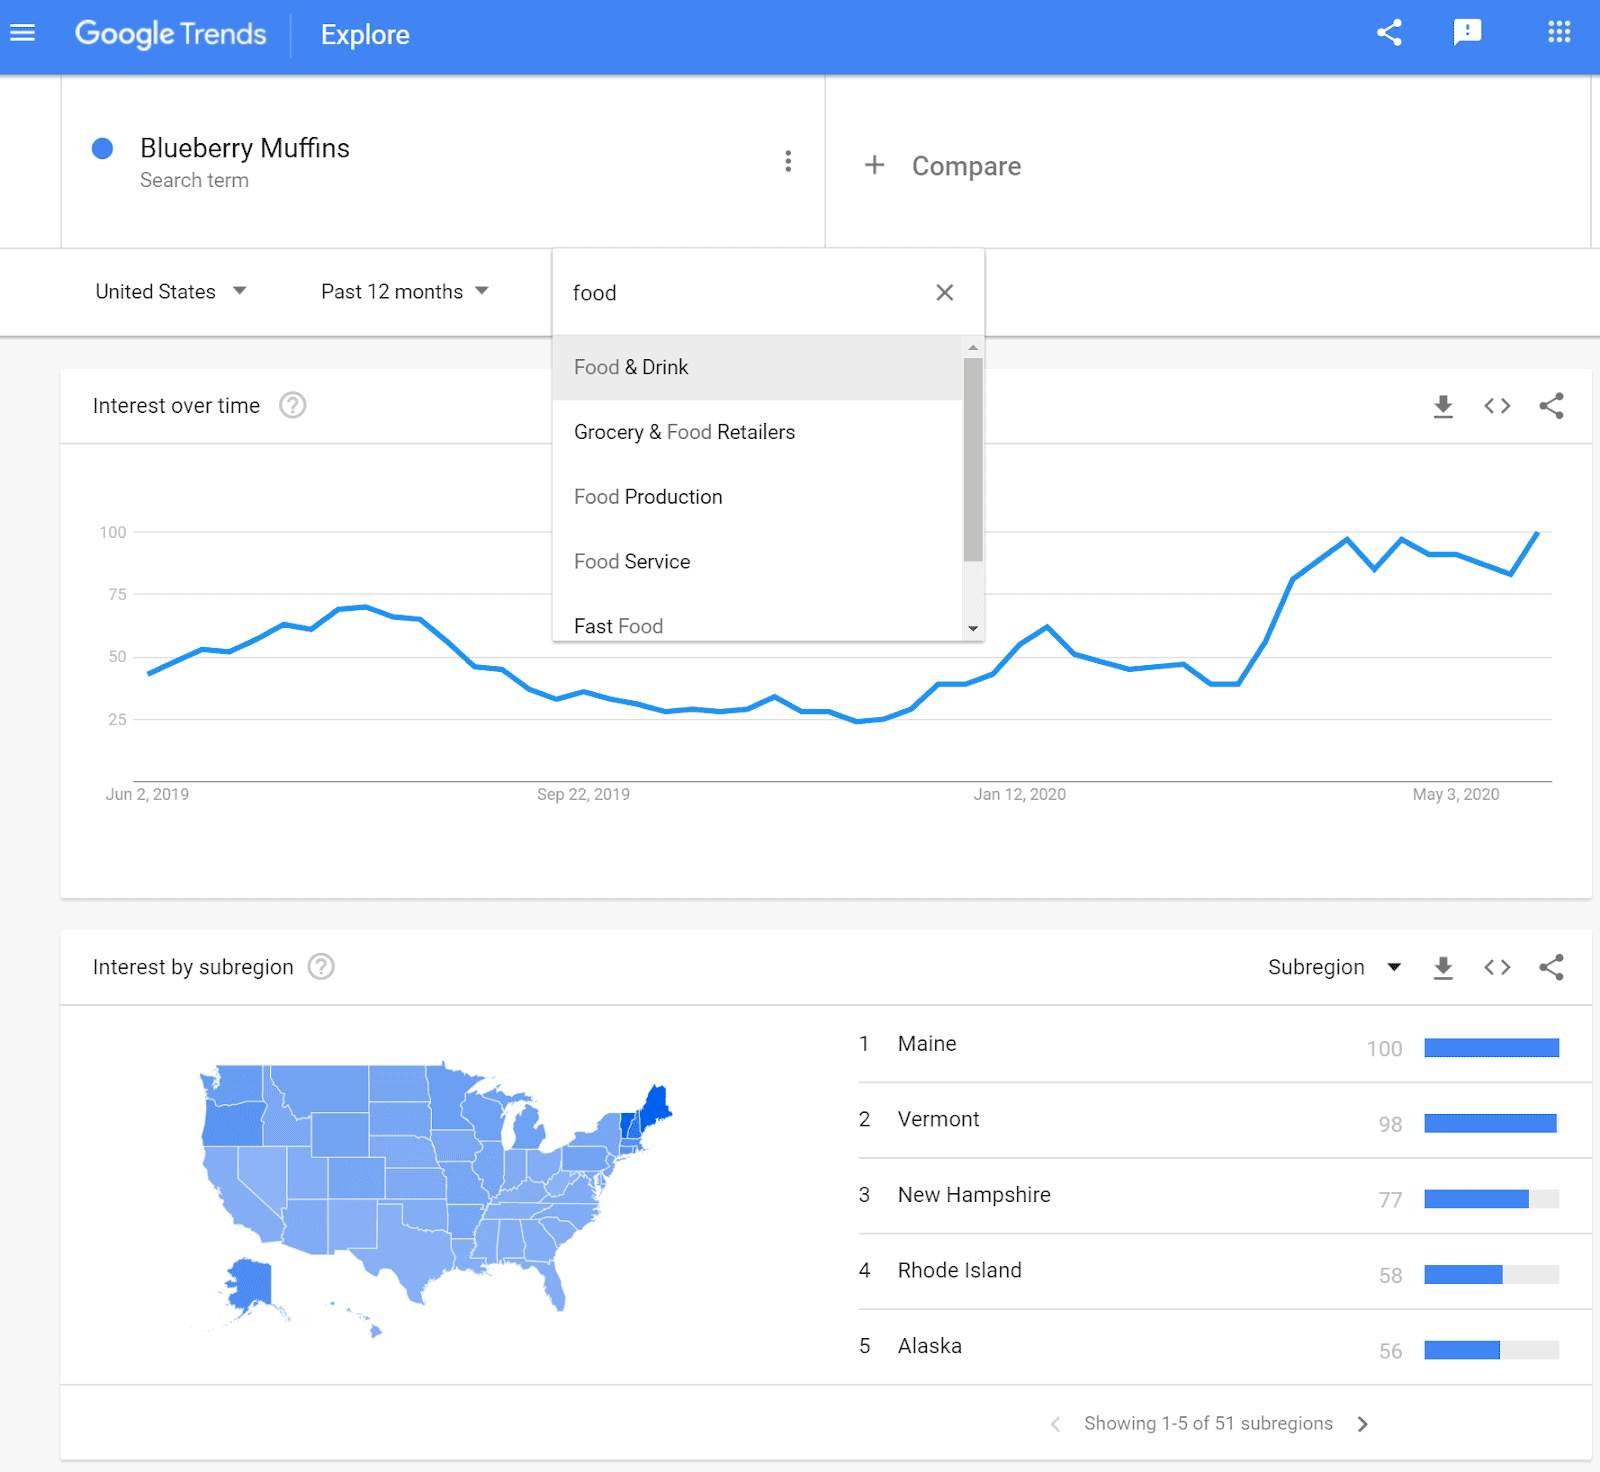 Google Trends explore page about Blueberry Muffins